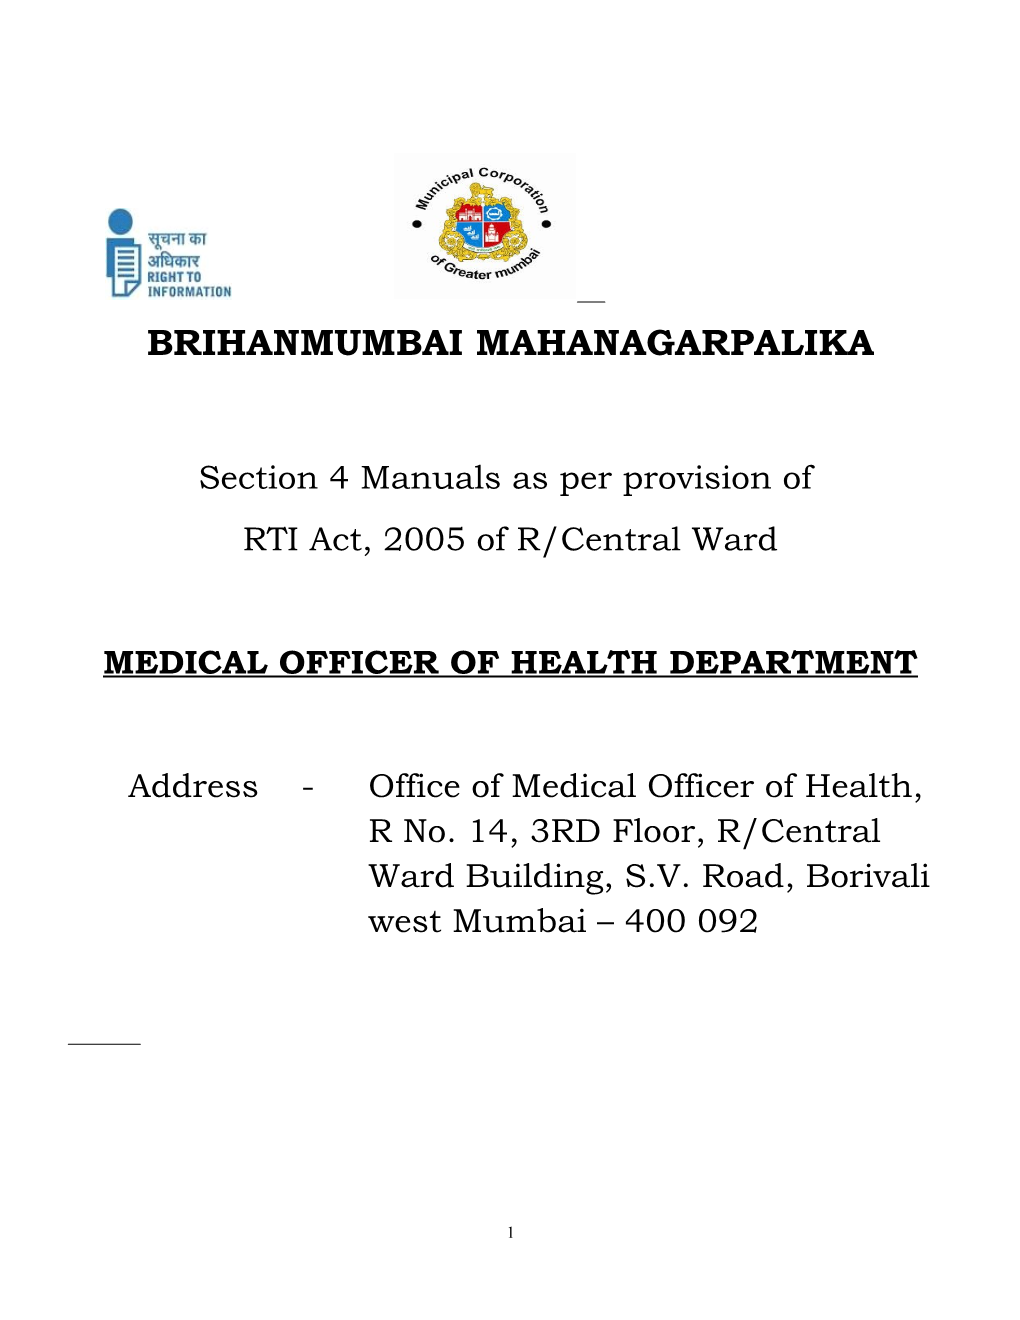 Medical Officer of Health Department